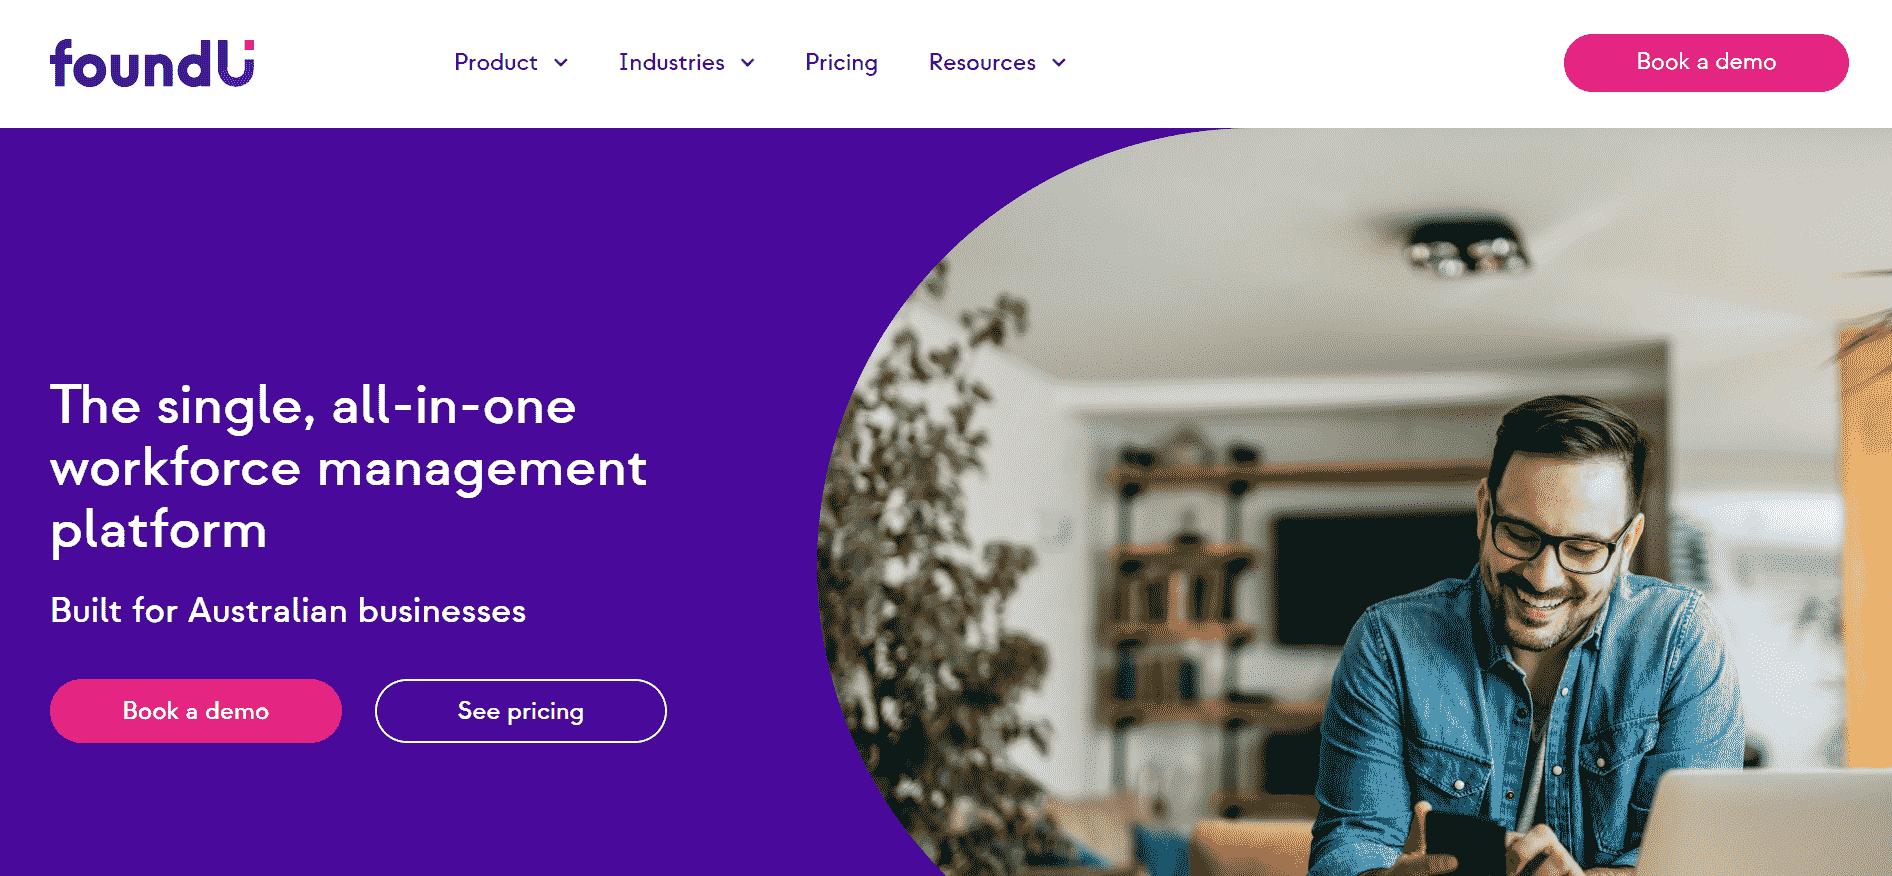 Website homepage of FoundU a top hris system in Australia showing a person looking at the phone and text is mentioned